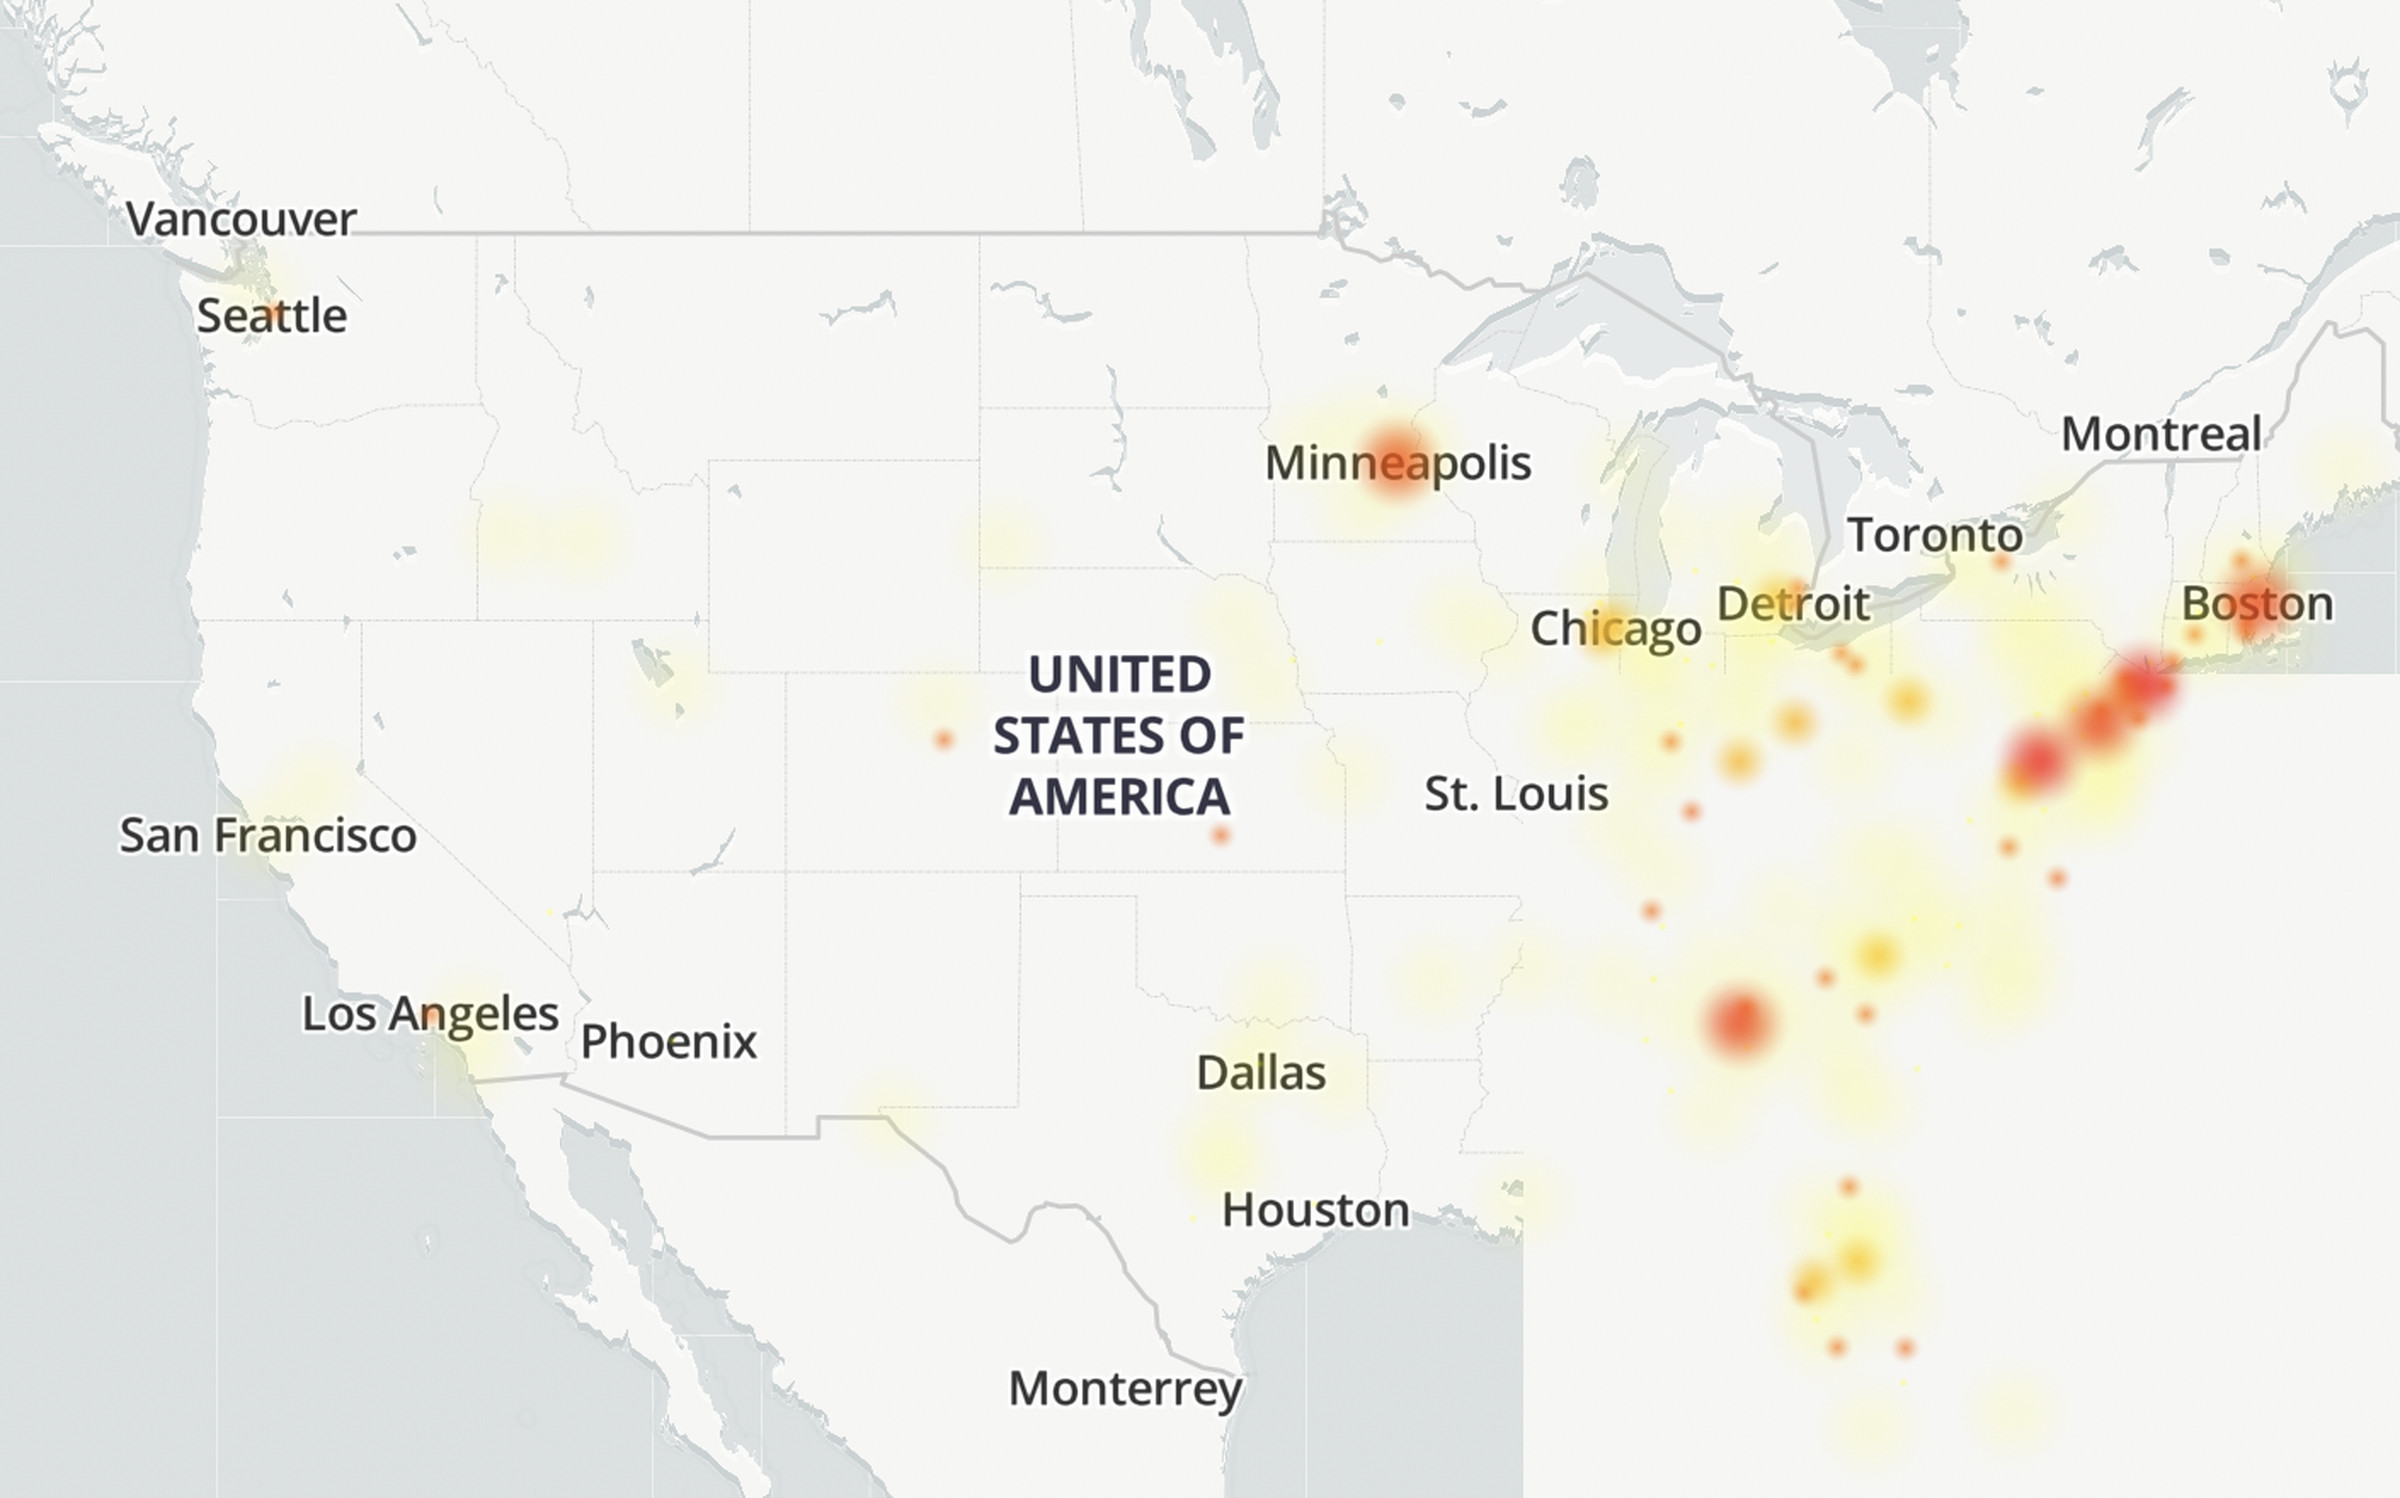 Downdetector map showing T-Mobile outage concentrated along the East Coast and Midwest.